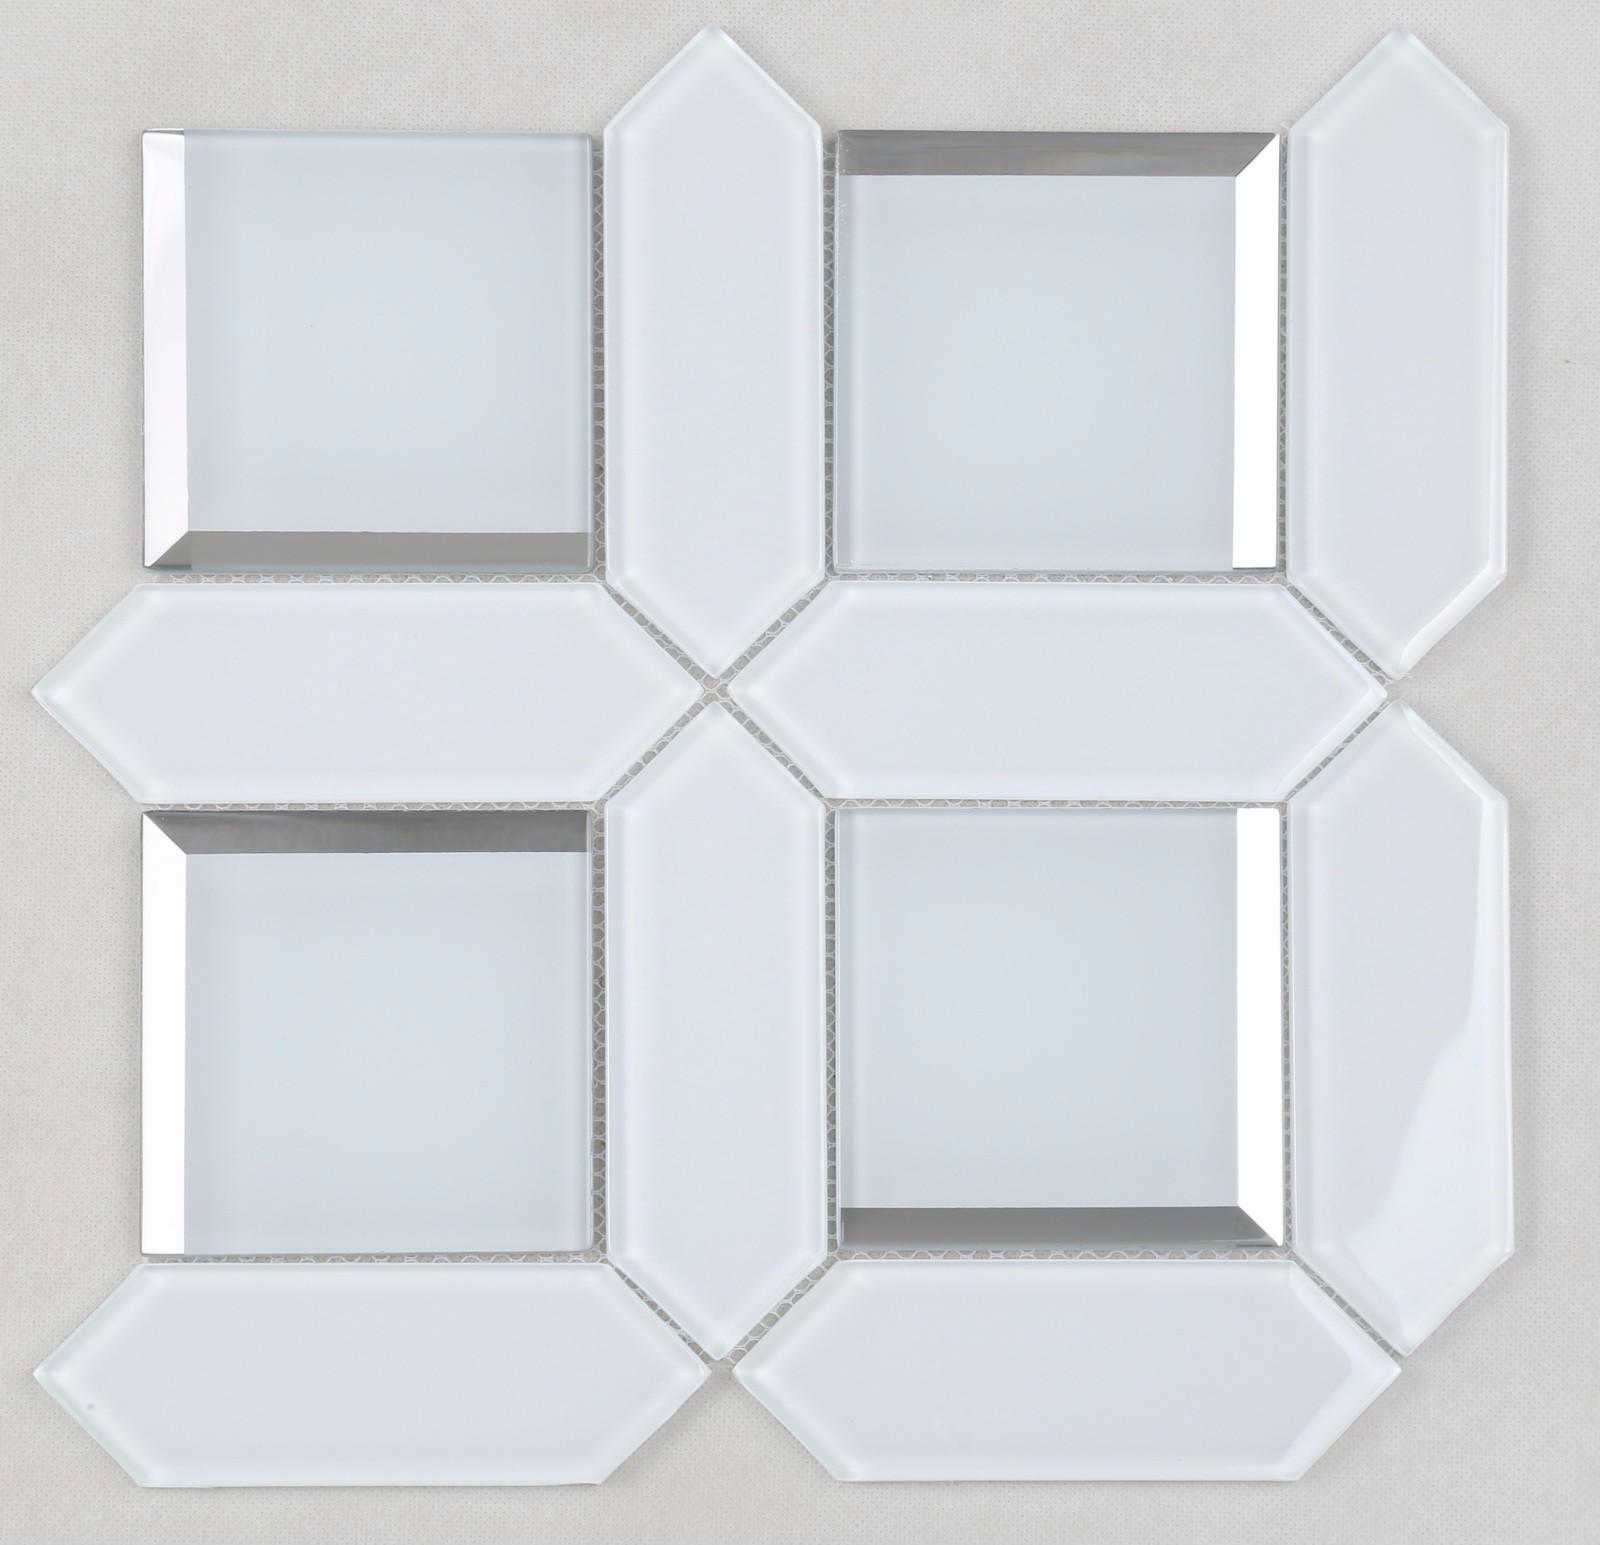 Heng Xing Top oblong hexagon tile Suppliers for kitchen-1